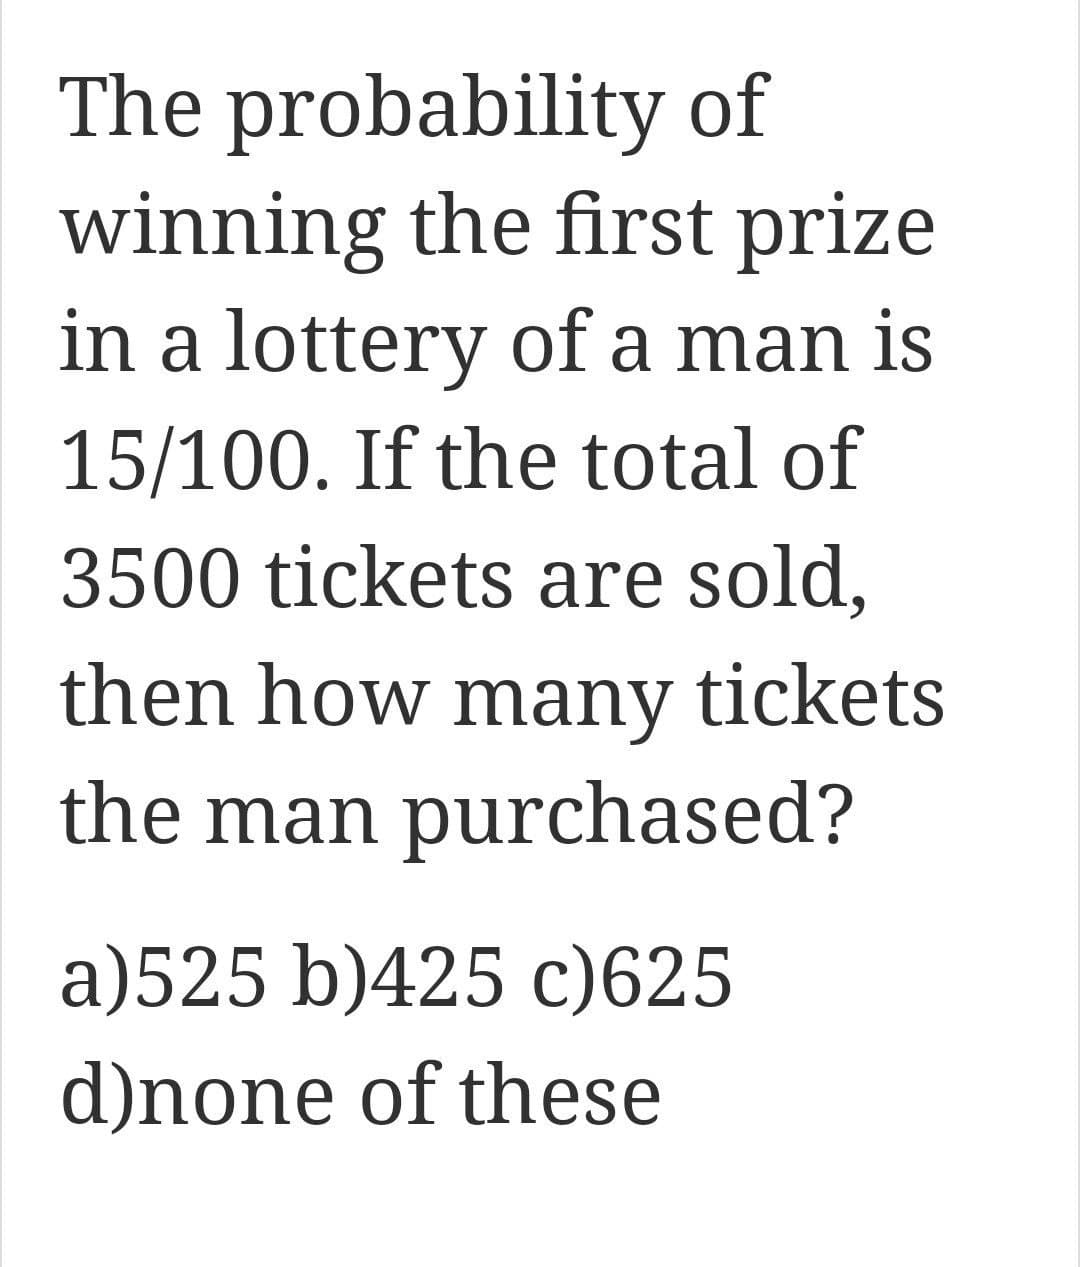 The probability of
winning the first prize
in a lottery of a man is
15/100. If the total of
3500 tickets are sold,
then how many tickets
the man purchased?
a)525 b)425 c) 625
d)none of these